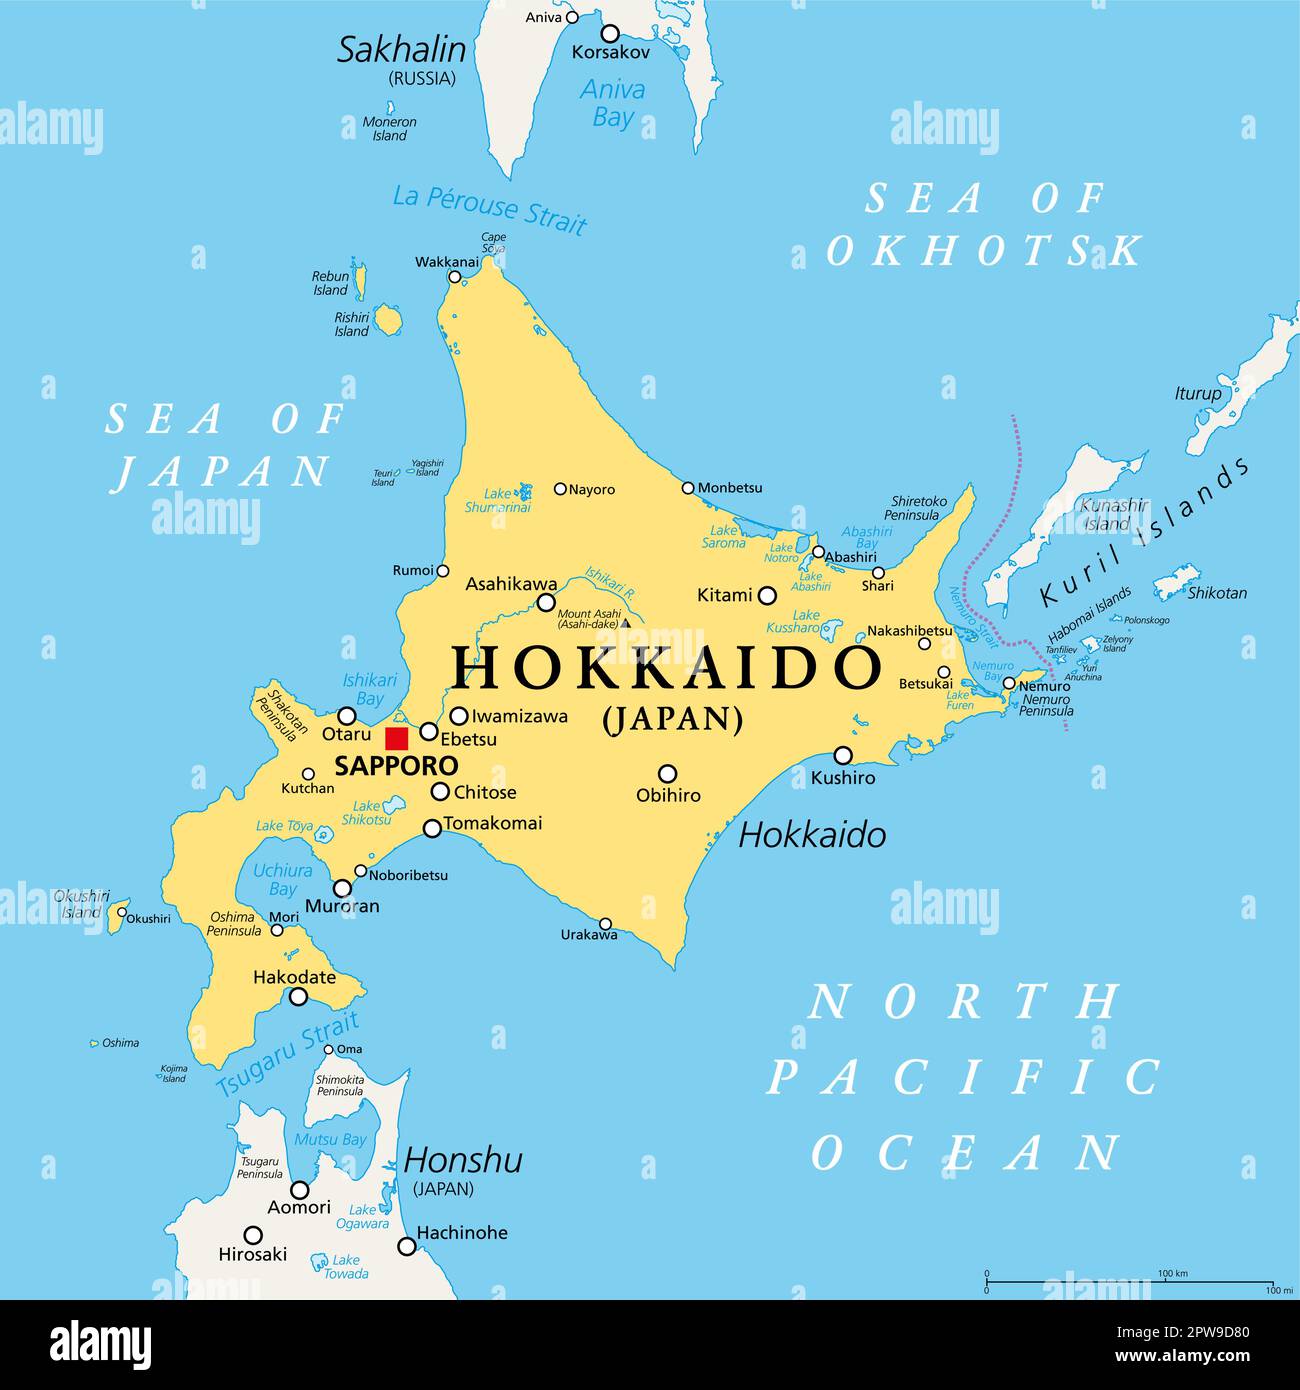 Hokkaido, second largest island of Japan, political map Stock Vector